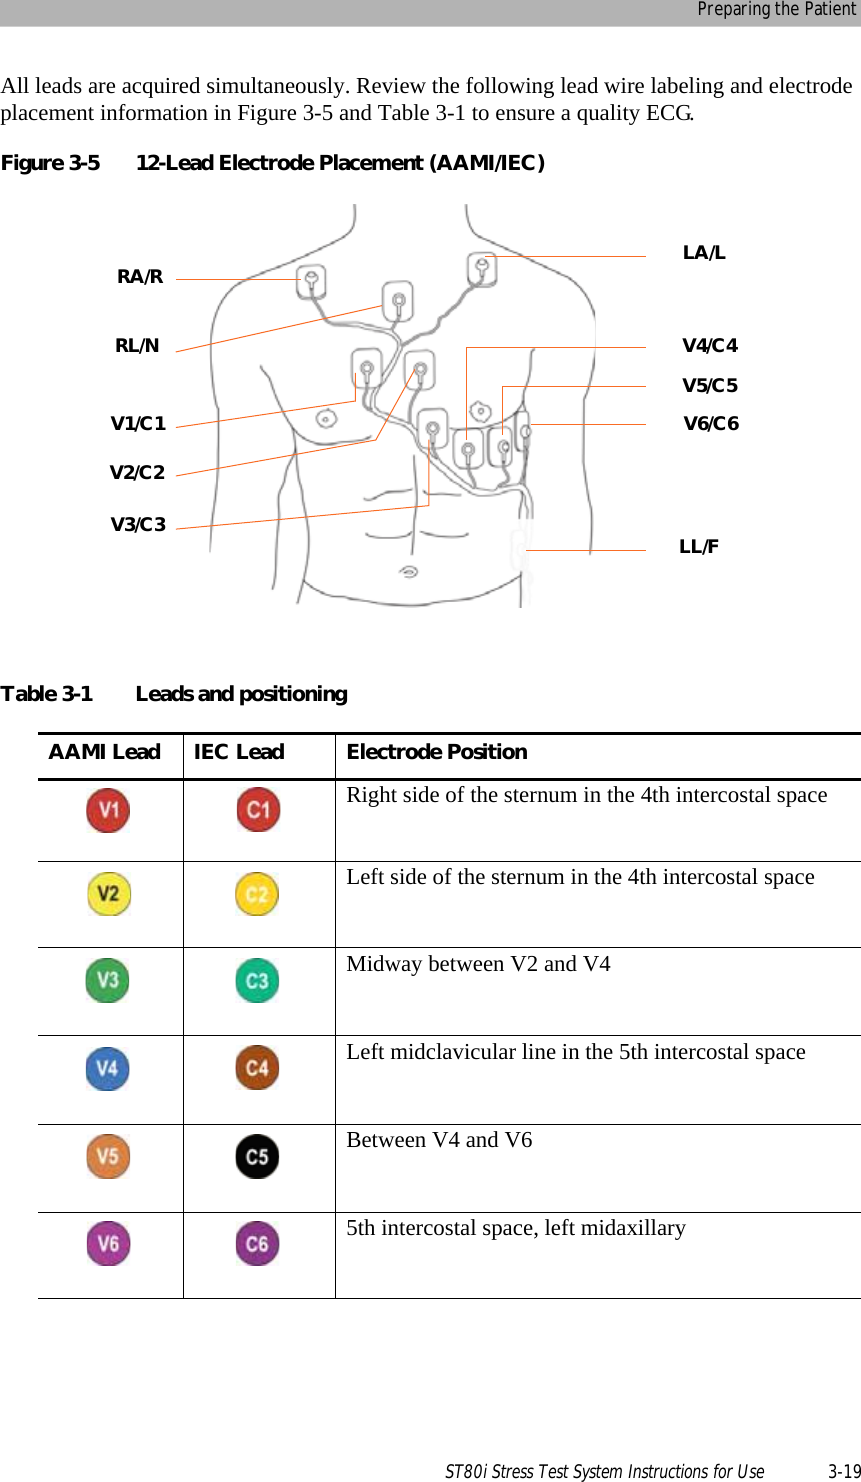 Preparing the PatientST80i Stress Test System Instructions for Use 3-19All leads are acquired simultaneously. Review the following lead wire labeling and electrode placement information in Figure 3-5 and Table 3-1 to ensure a quality ECG.Figure 3-5 12-Lead Electrode Placement (AAMI/IEC)Table 3-1 Leads and positioningAAMI Lead  IEC Lead  Electrode PositionRight side of the sternum in the 4th intercostal spaceLeft side of the sternum in the 4th intercostal spaceMidway between V2 and V4Left midclavicular line in the 5th intercostal spaceBetween V4 and V65th intercostal space, left midaxillaryV3/C3RL/NRA/RV1/C1V2/C2V4/C4V5/C5V6/C6LA/LLL/F